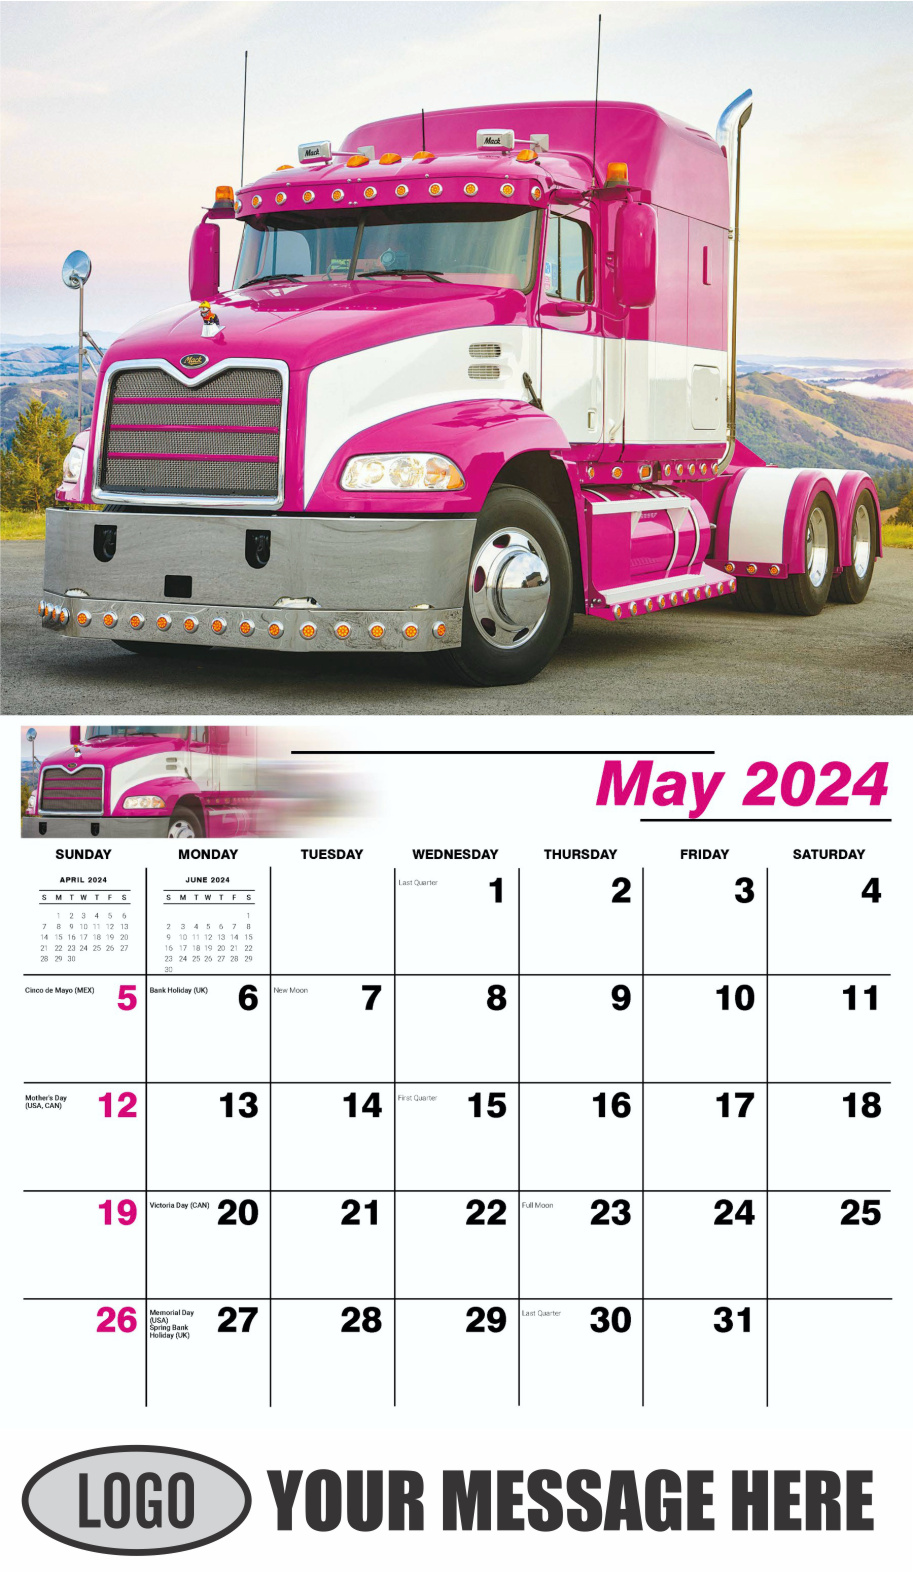 Kings of the Road 2024 Automotive Business Promotional Calendar - May